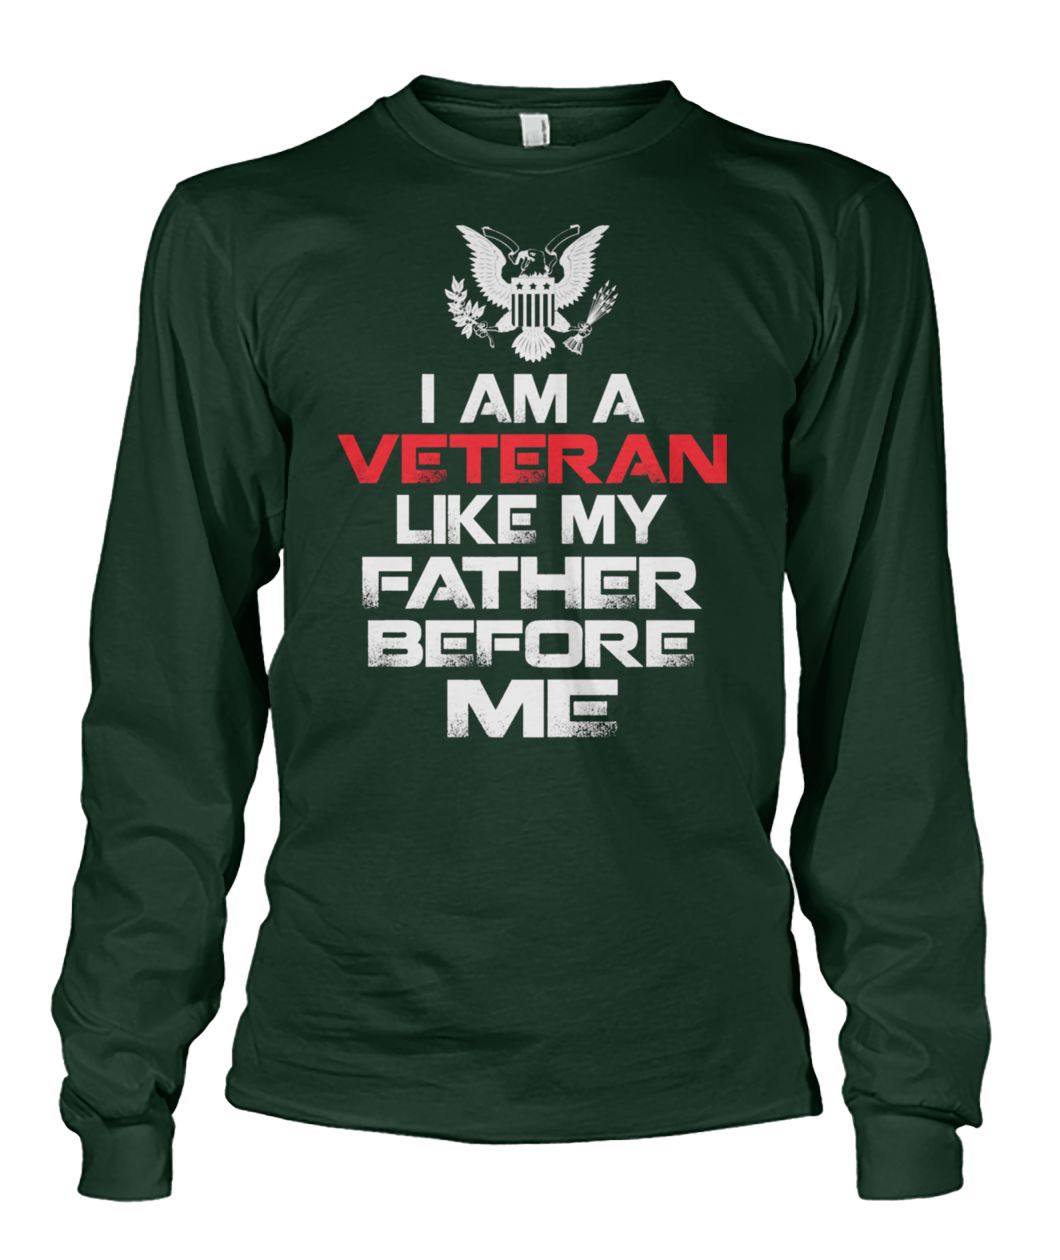 I am a veteran like my father before me unisex long sleeve